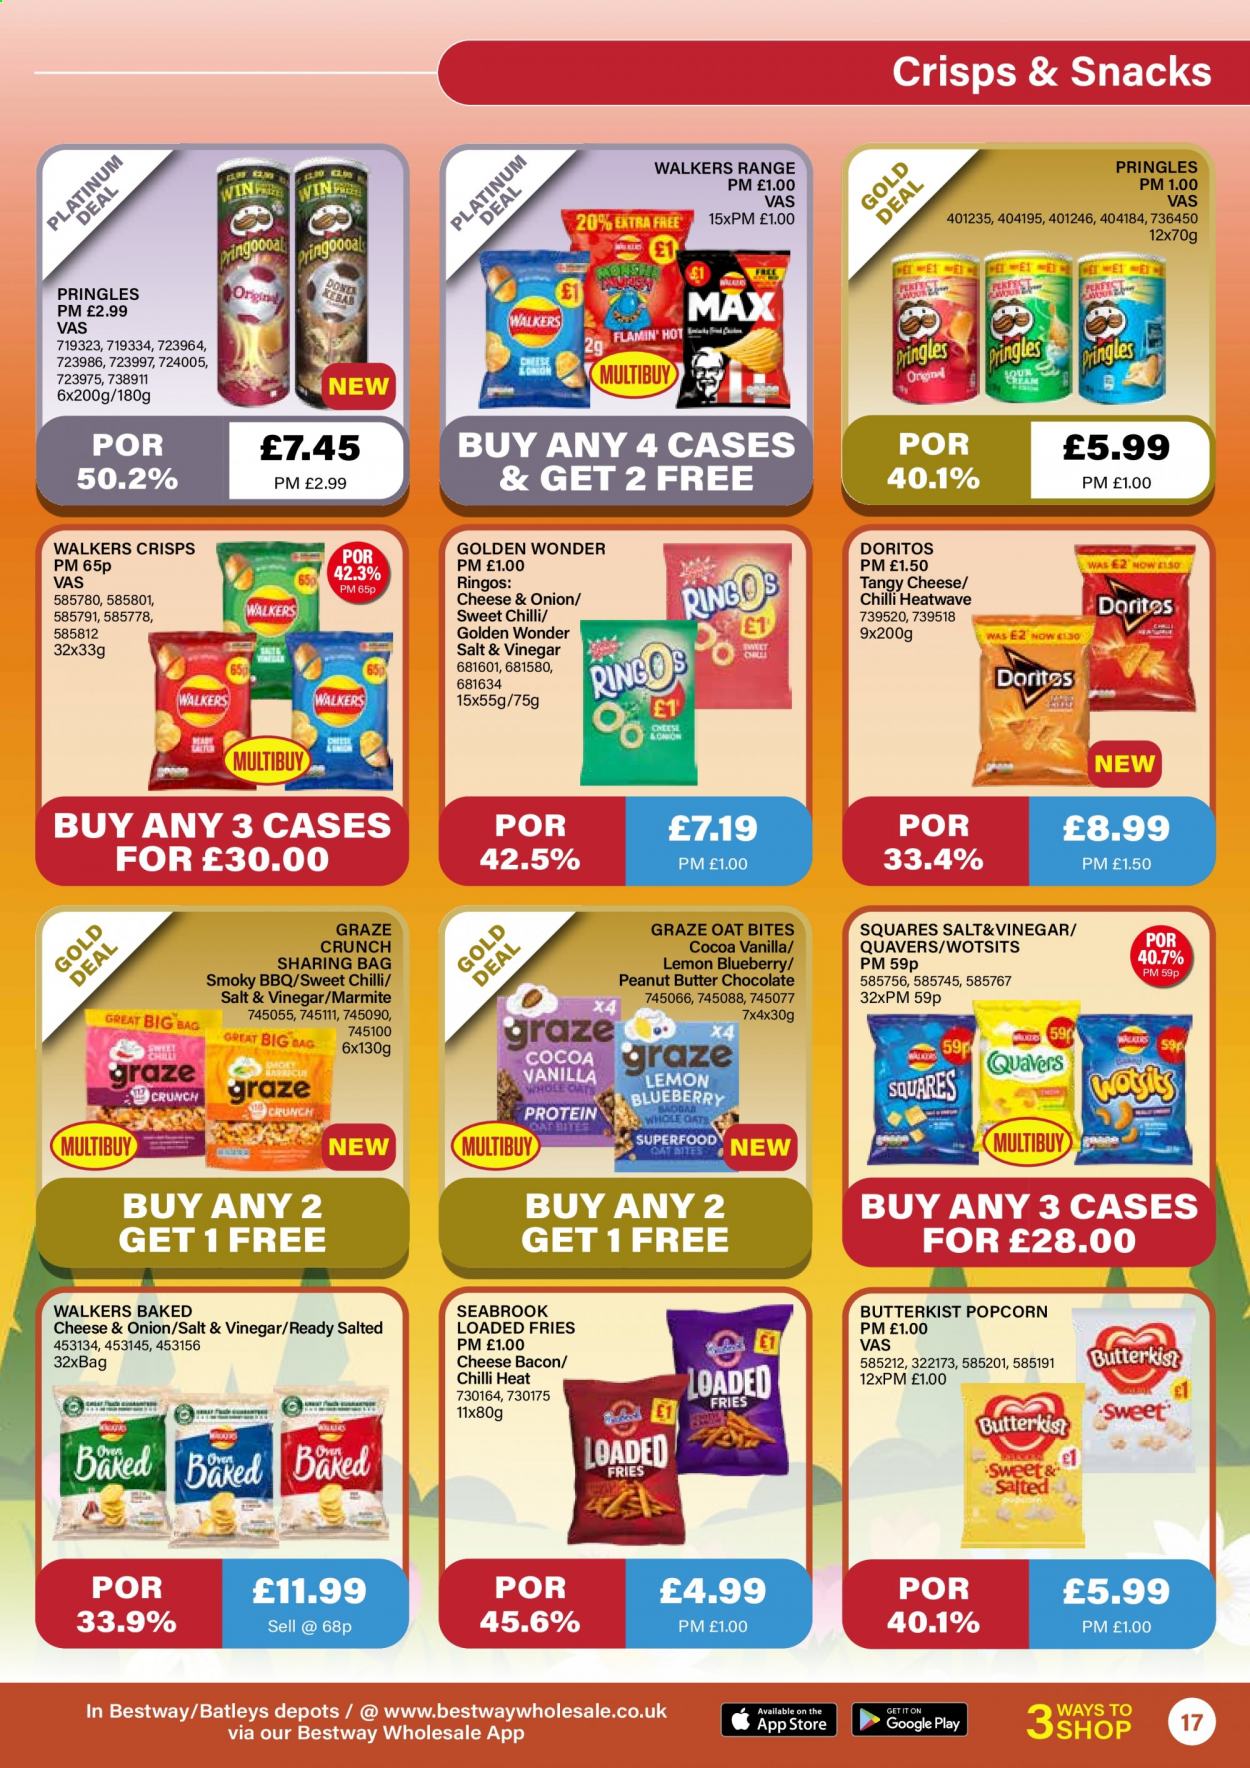 thumbnail - Bestway offer  - 23/04/2021 - 20/05/2021 - Sales products - bacon, potato fries, chocolate, snack, Doritos, Pringles, popcorn, cocoa, oat bites, vinegar, peanut butter, Graze. Page 17.